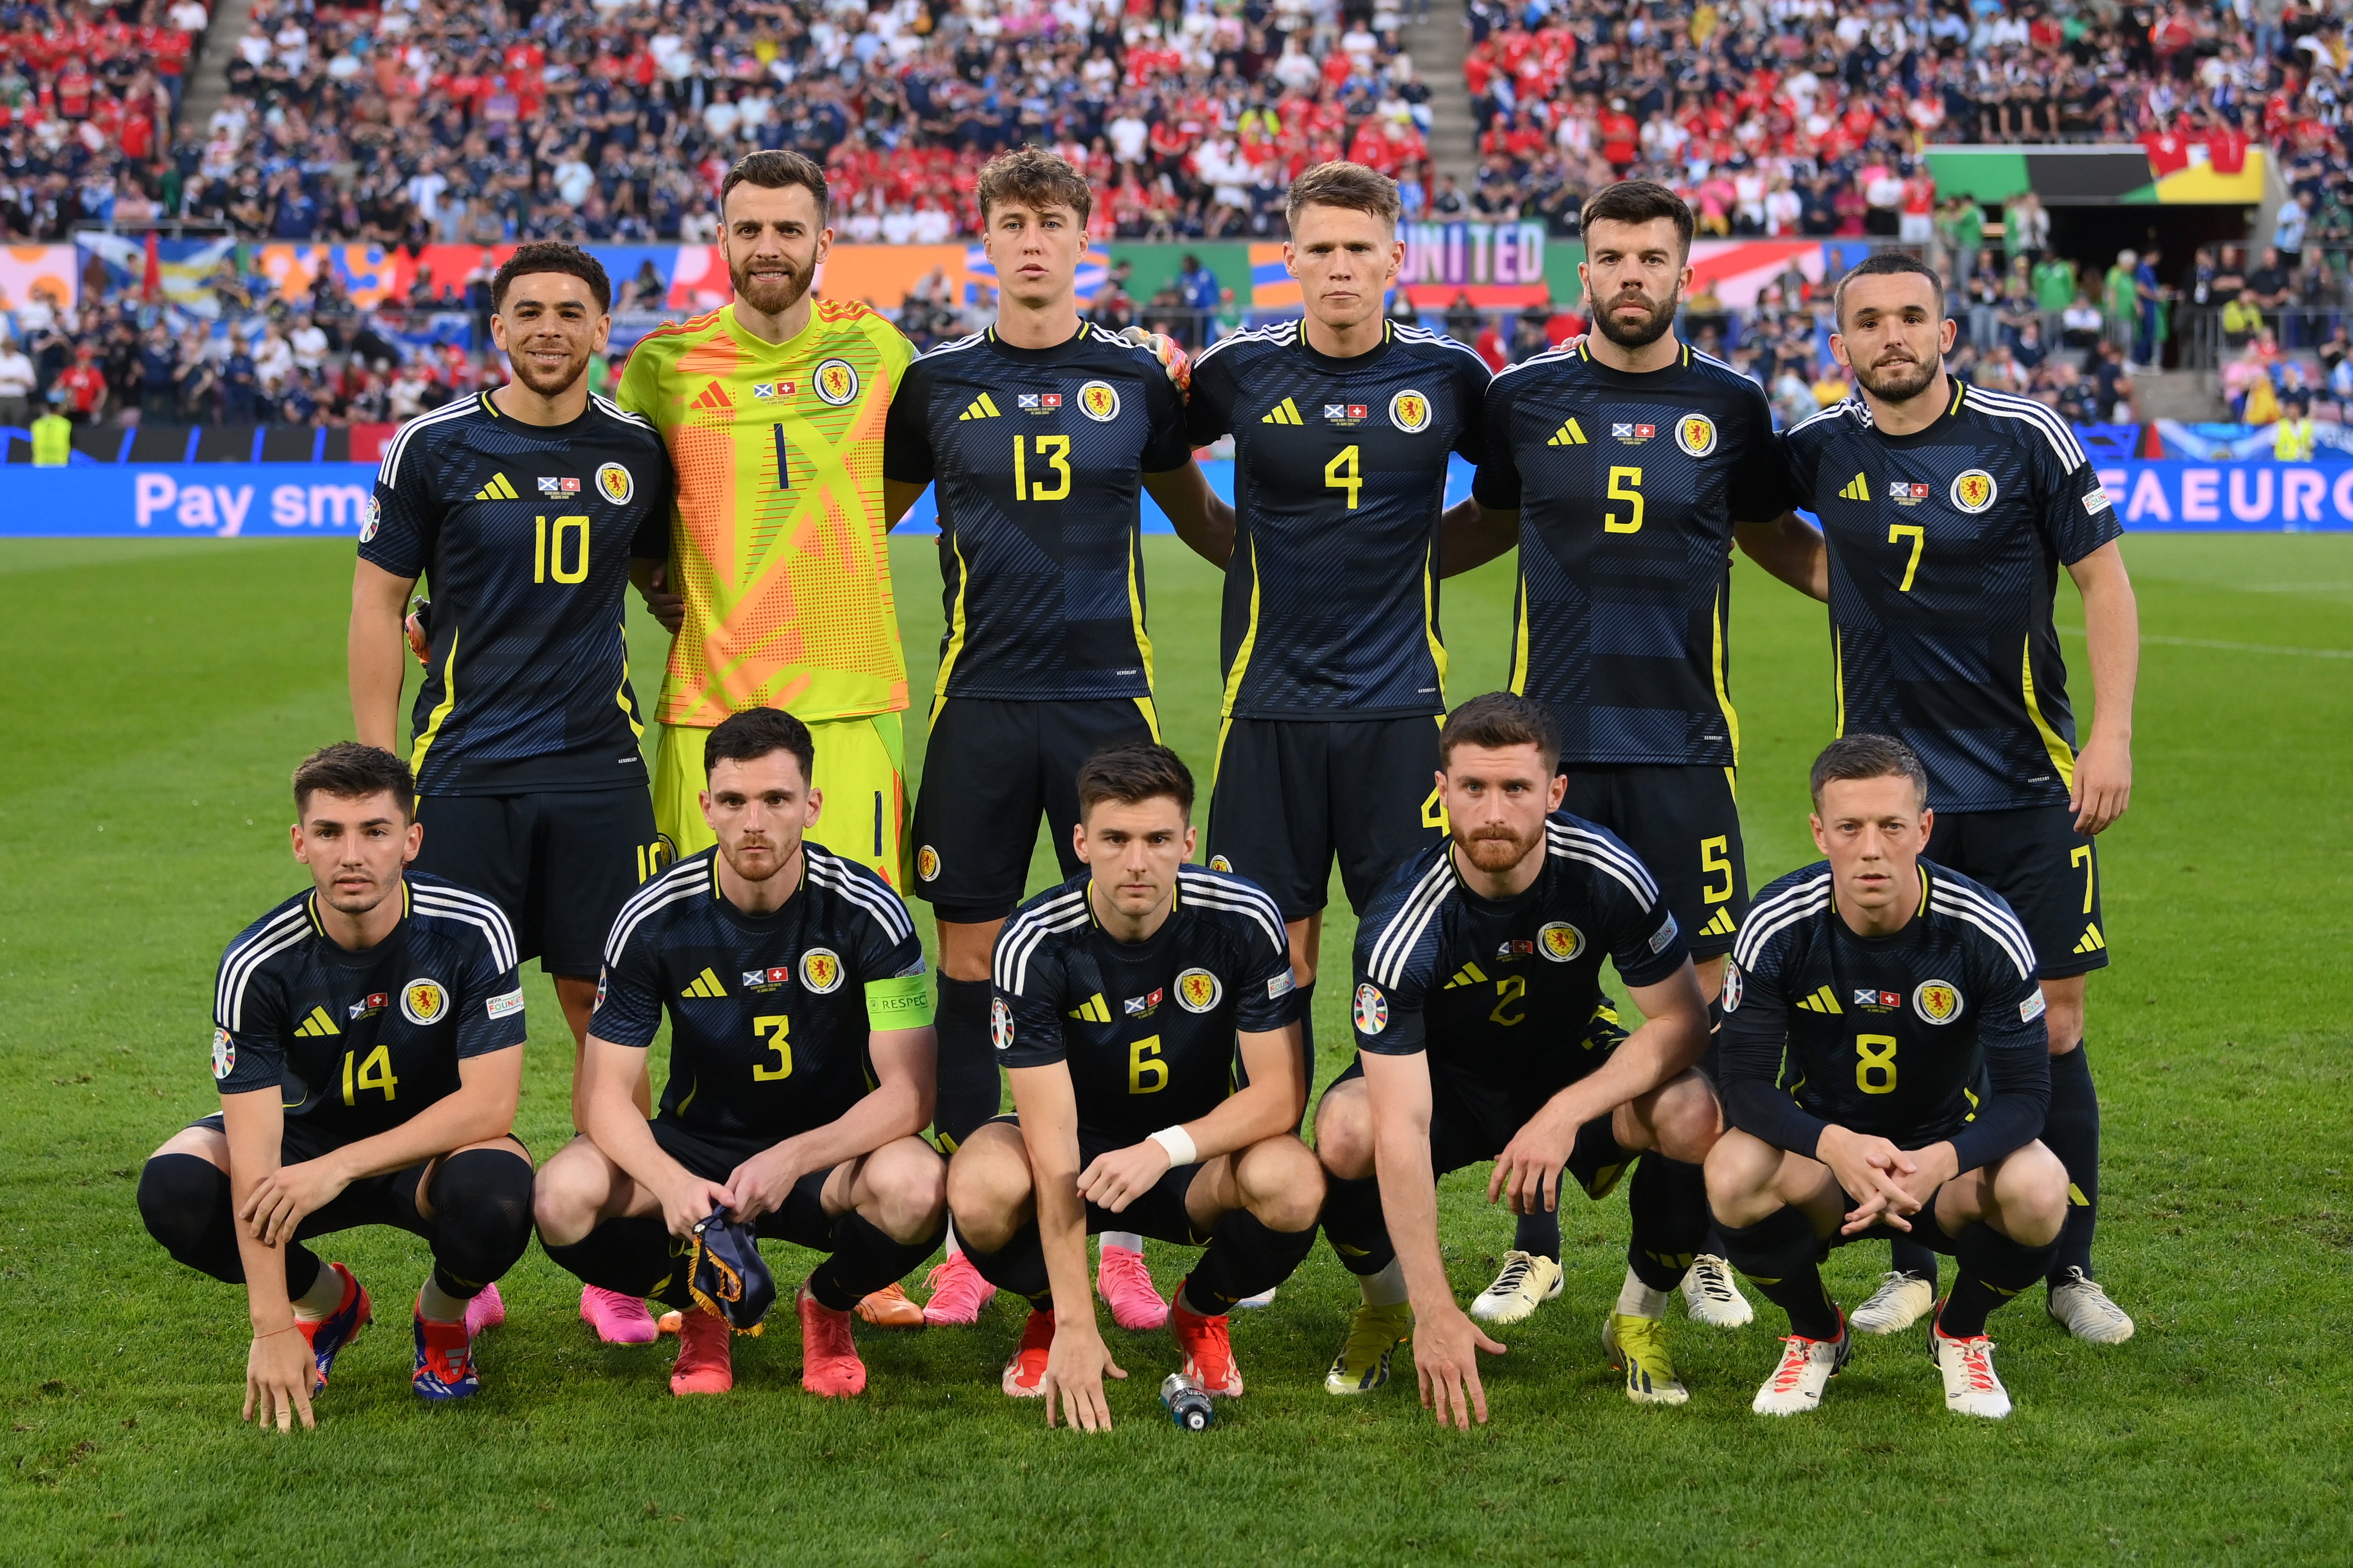 Scotland will go into the Hungary game targeting a win and four points